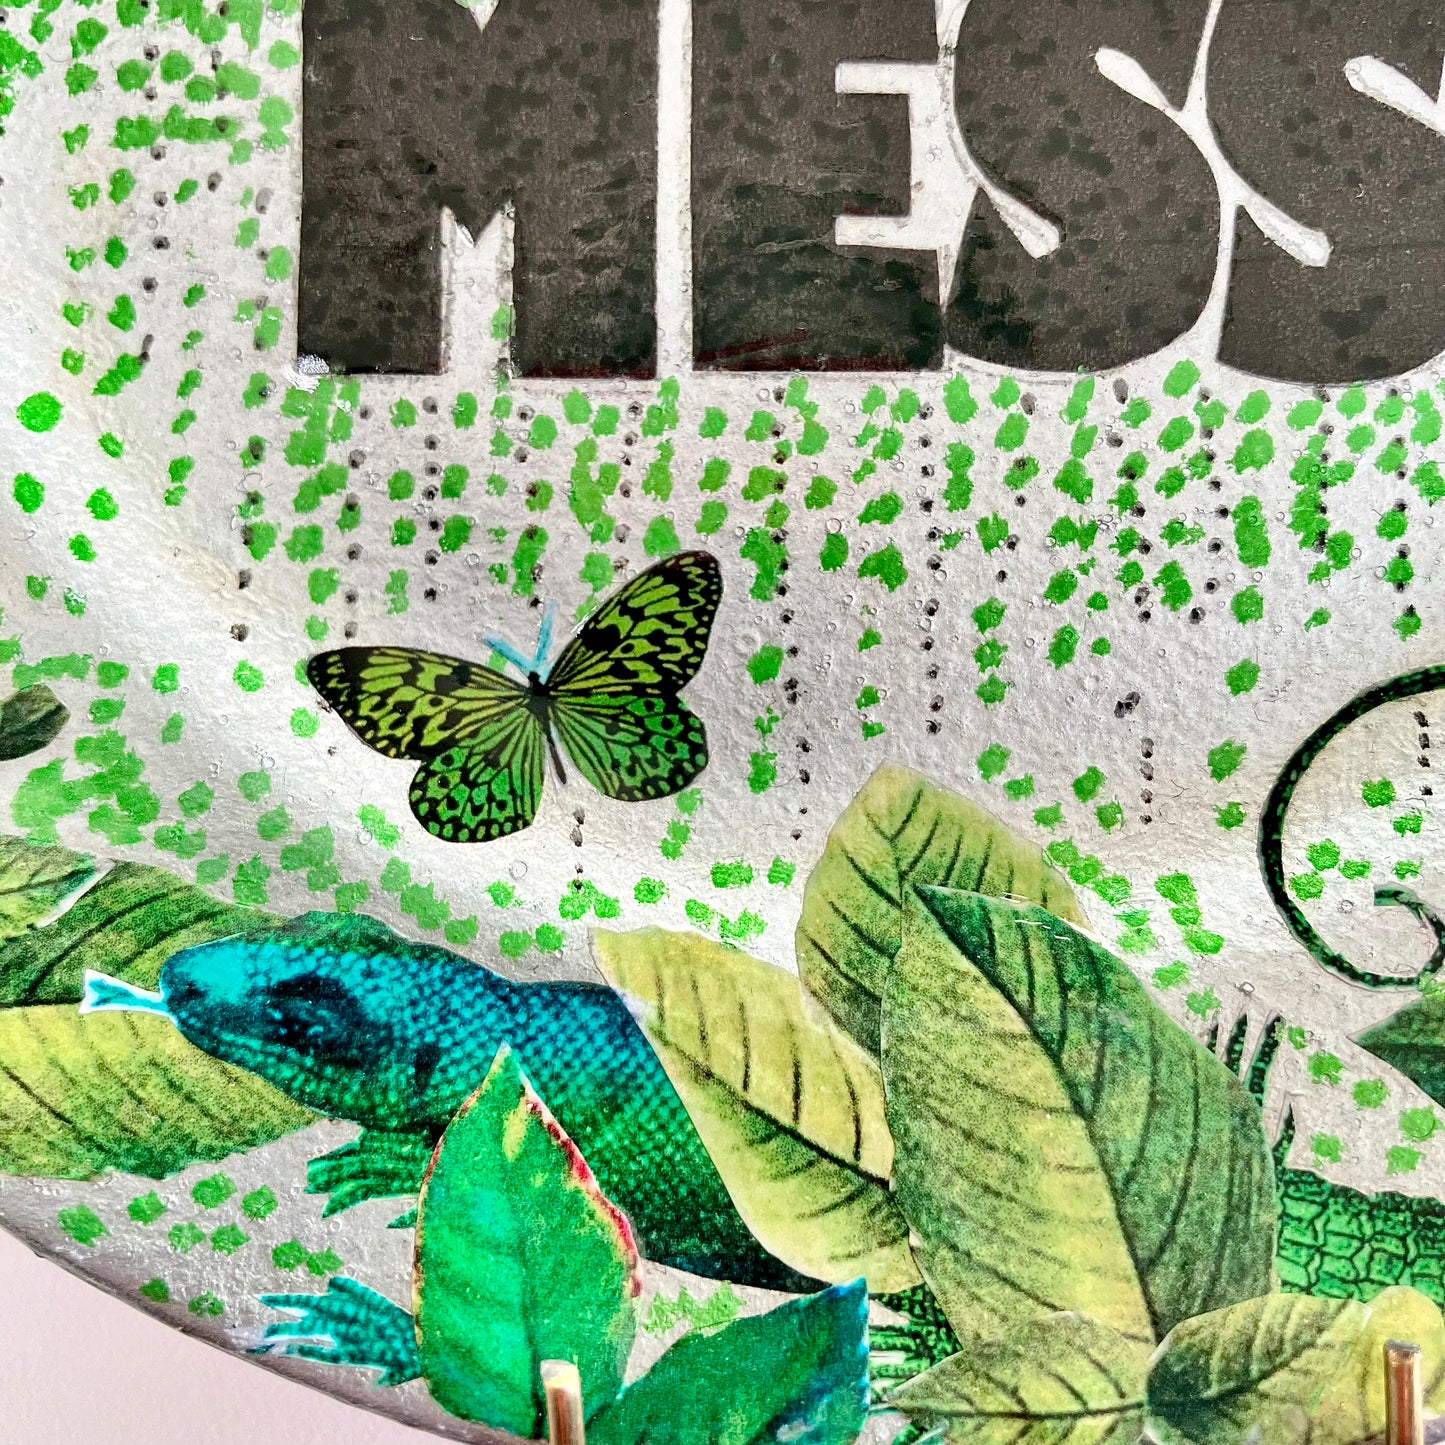 "Perfect Mess" Wall Plate by House of Frisson, closeup detail of the collage showing green leaves, a lizard, a moth, and green pattern on a silver background.